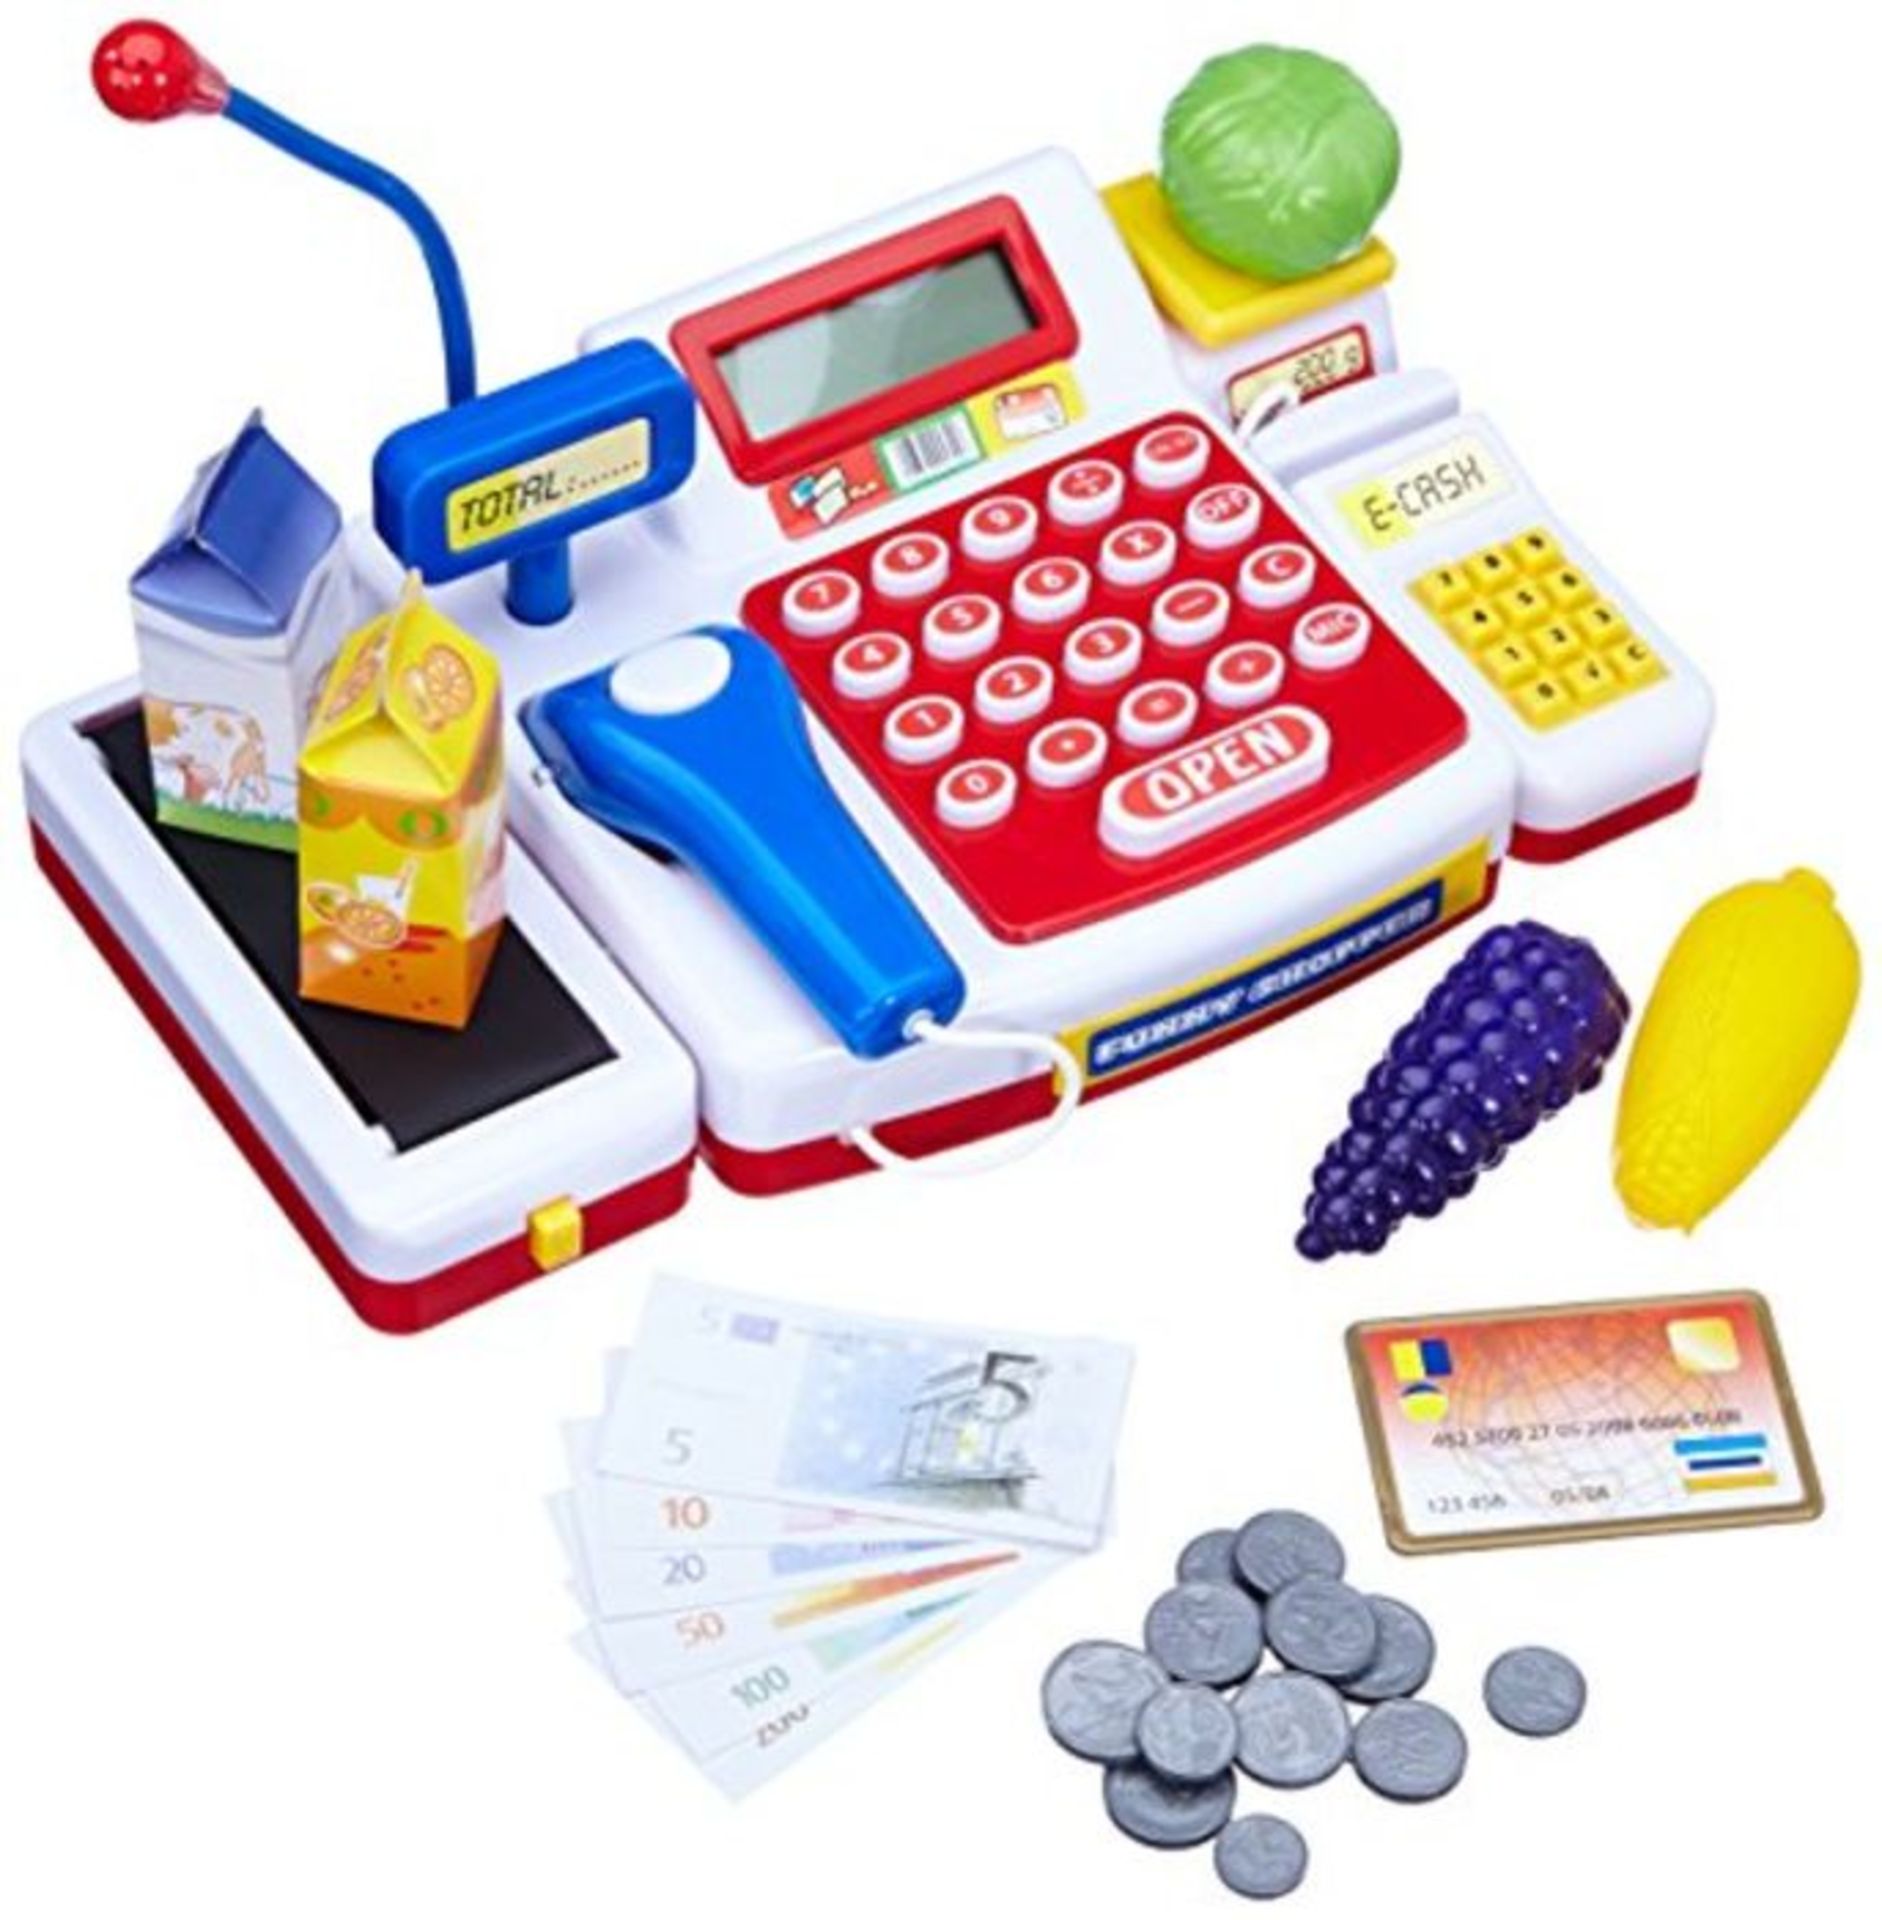 COMBINED RRP £2554.00 LOT TO CONTAIN 295 ASSORTED Home Improvement: Hama, Car, Simba, iPad, Ank - Image 50 of 94